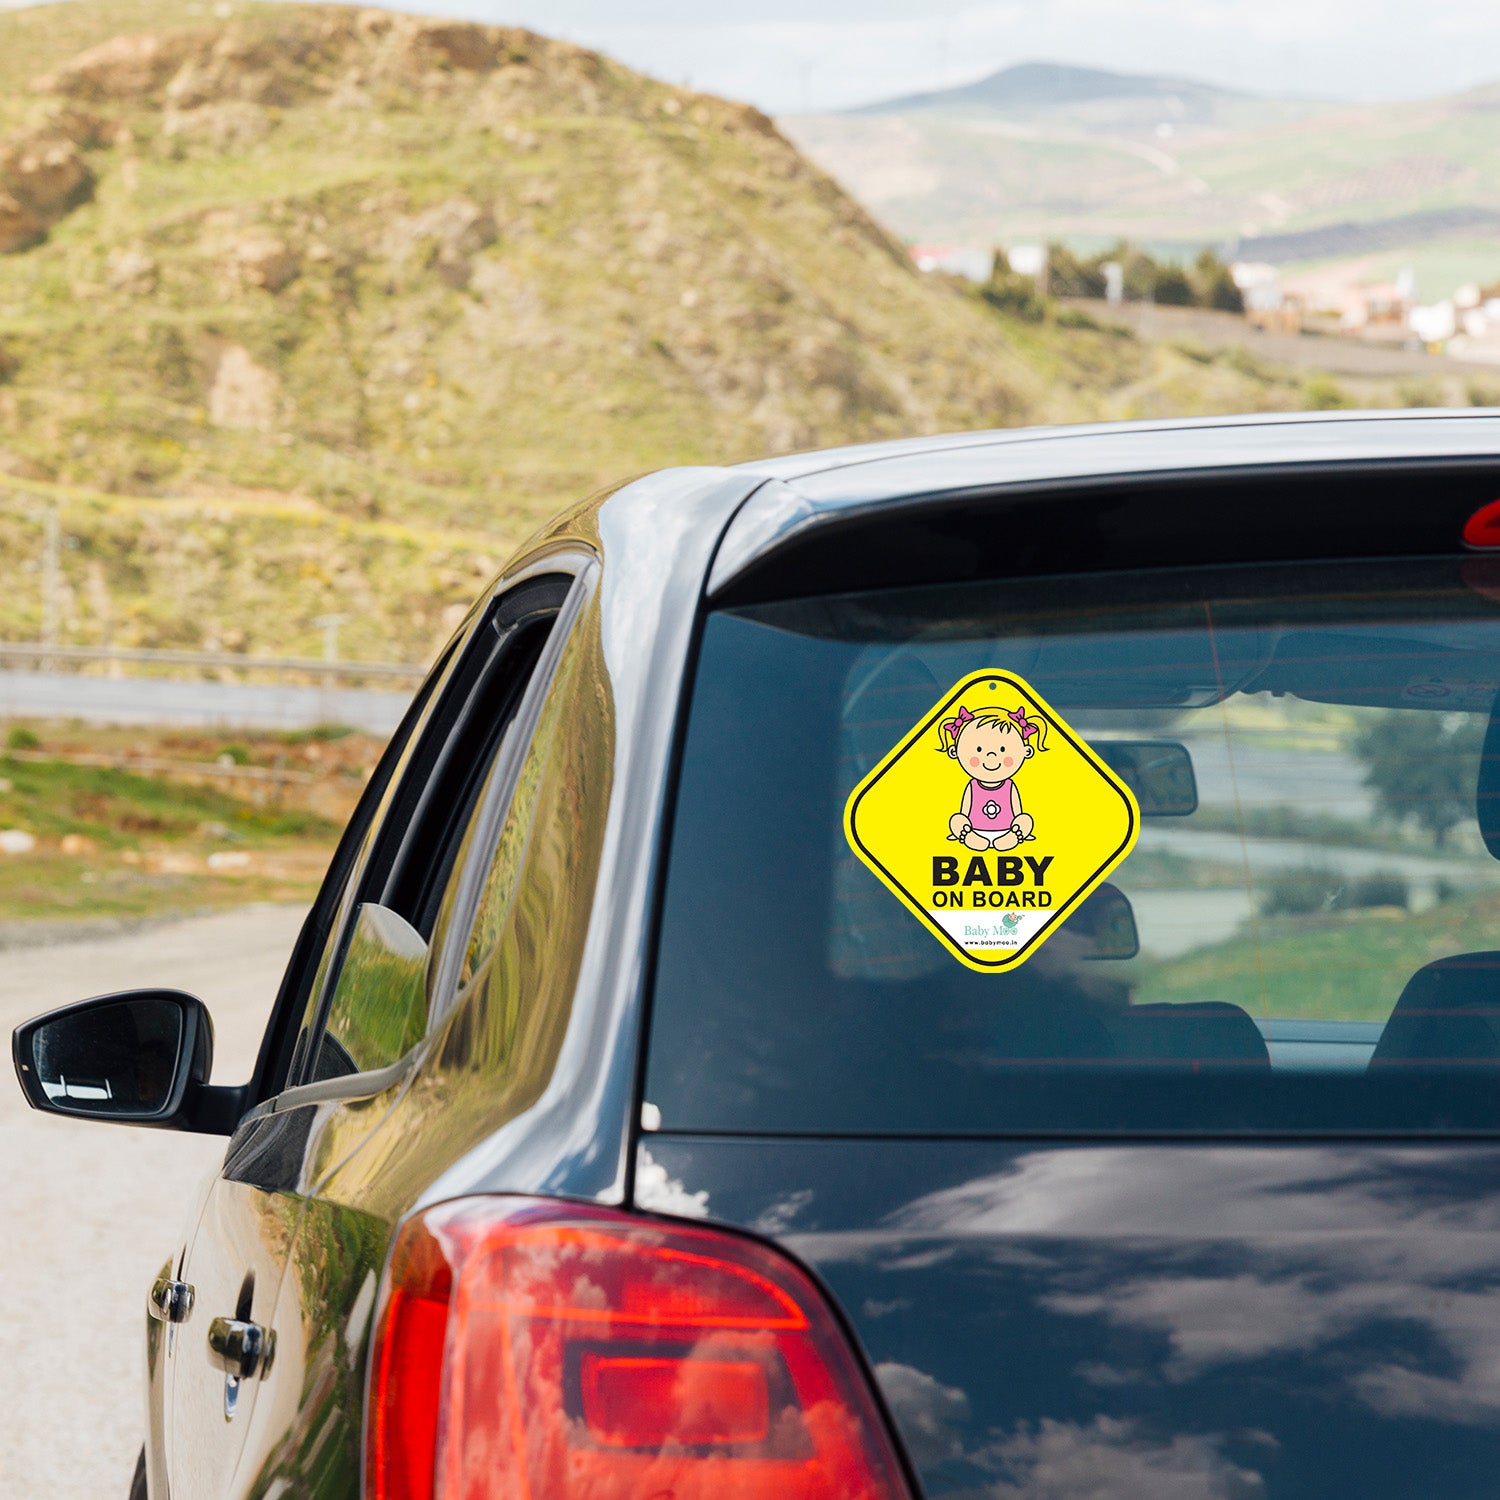 Baby Moo Kids Car Safety Sign Baby On Board With Suction Cup Clip 2 Pack - Yellow